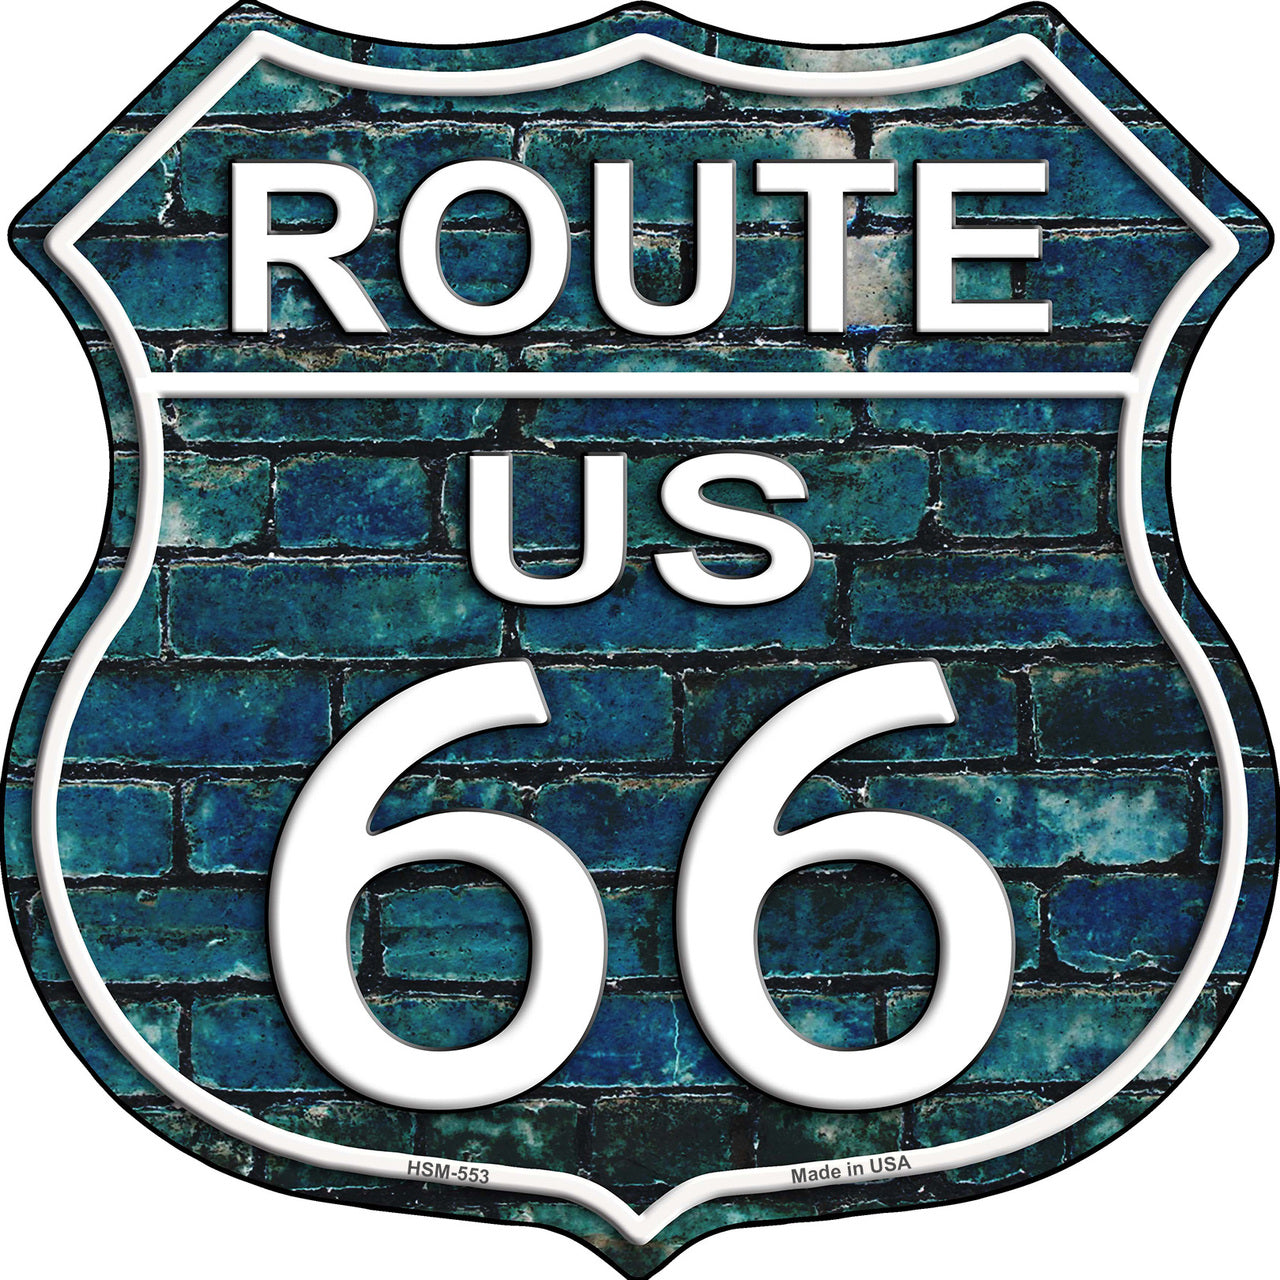 Route 66 Blue Brick Wall Highway Shield Novelty Metal Magnet HSM-553